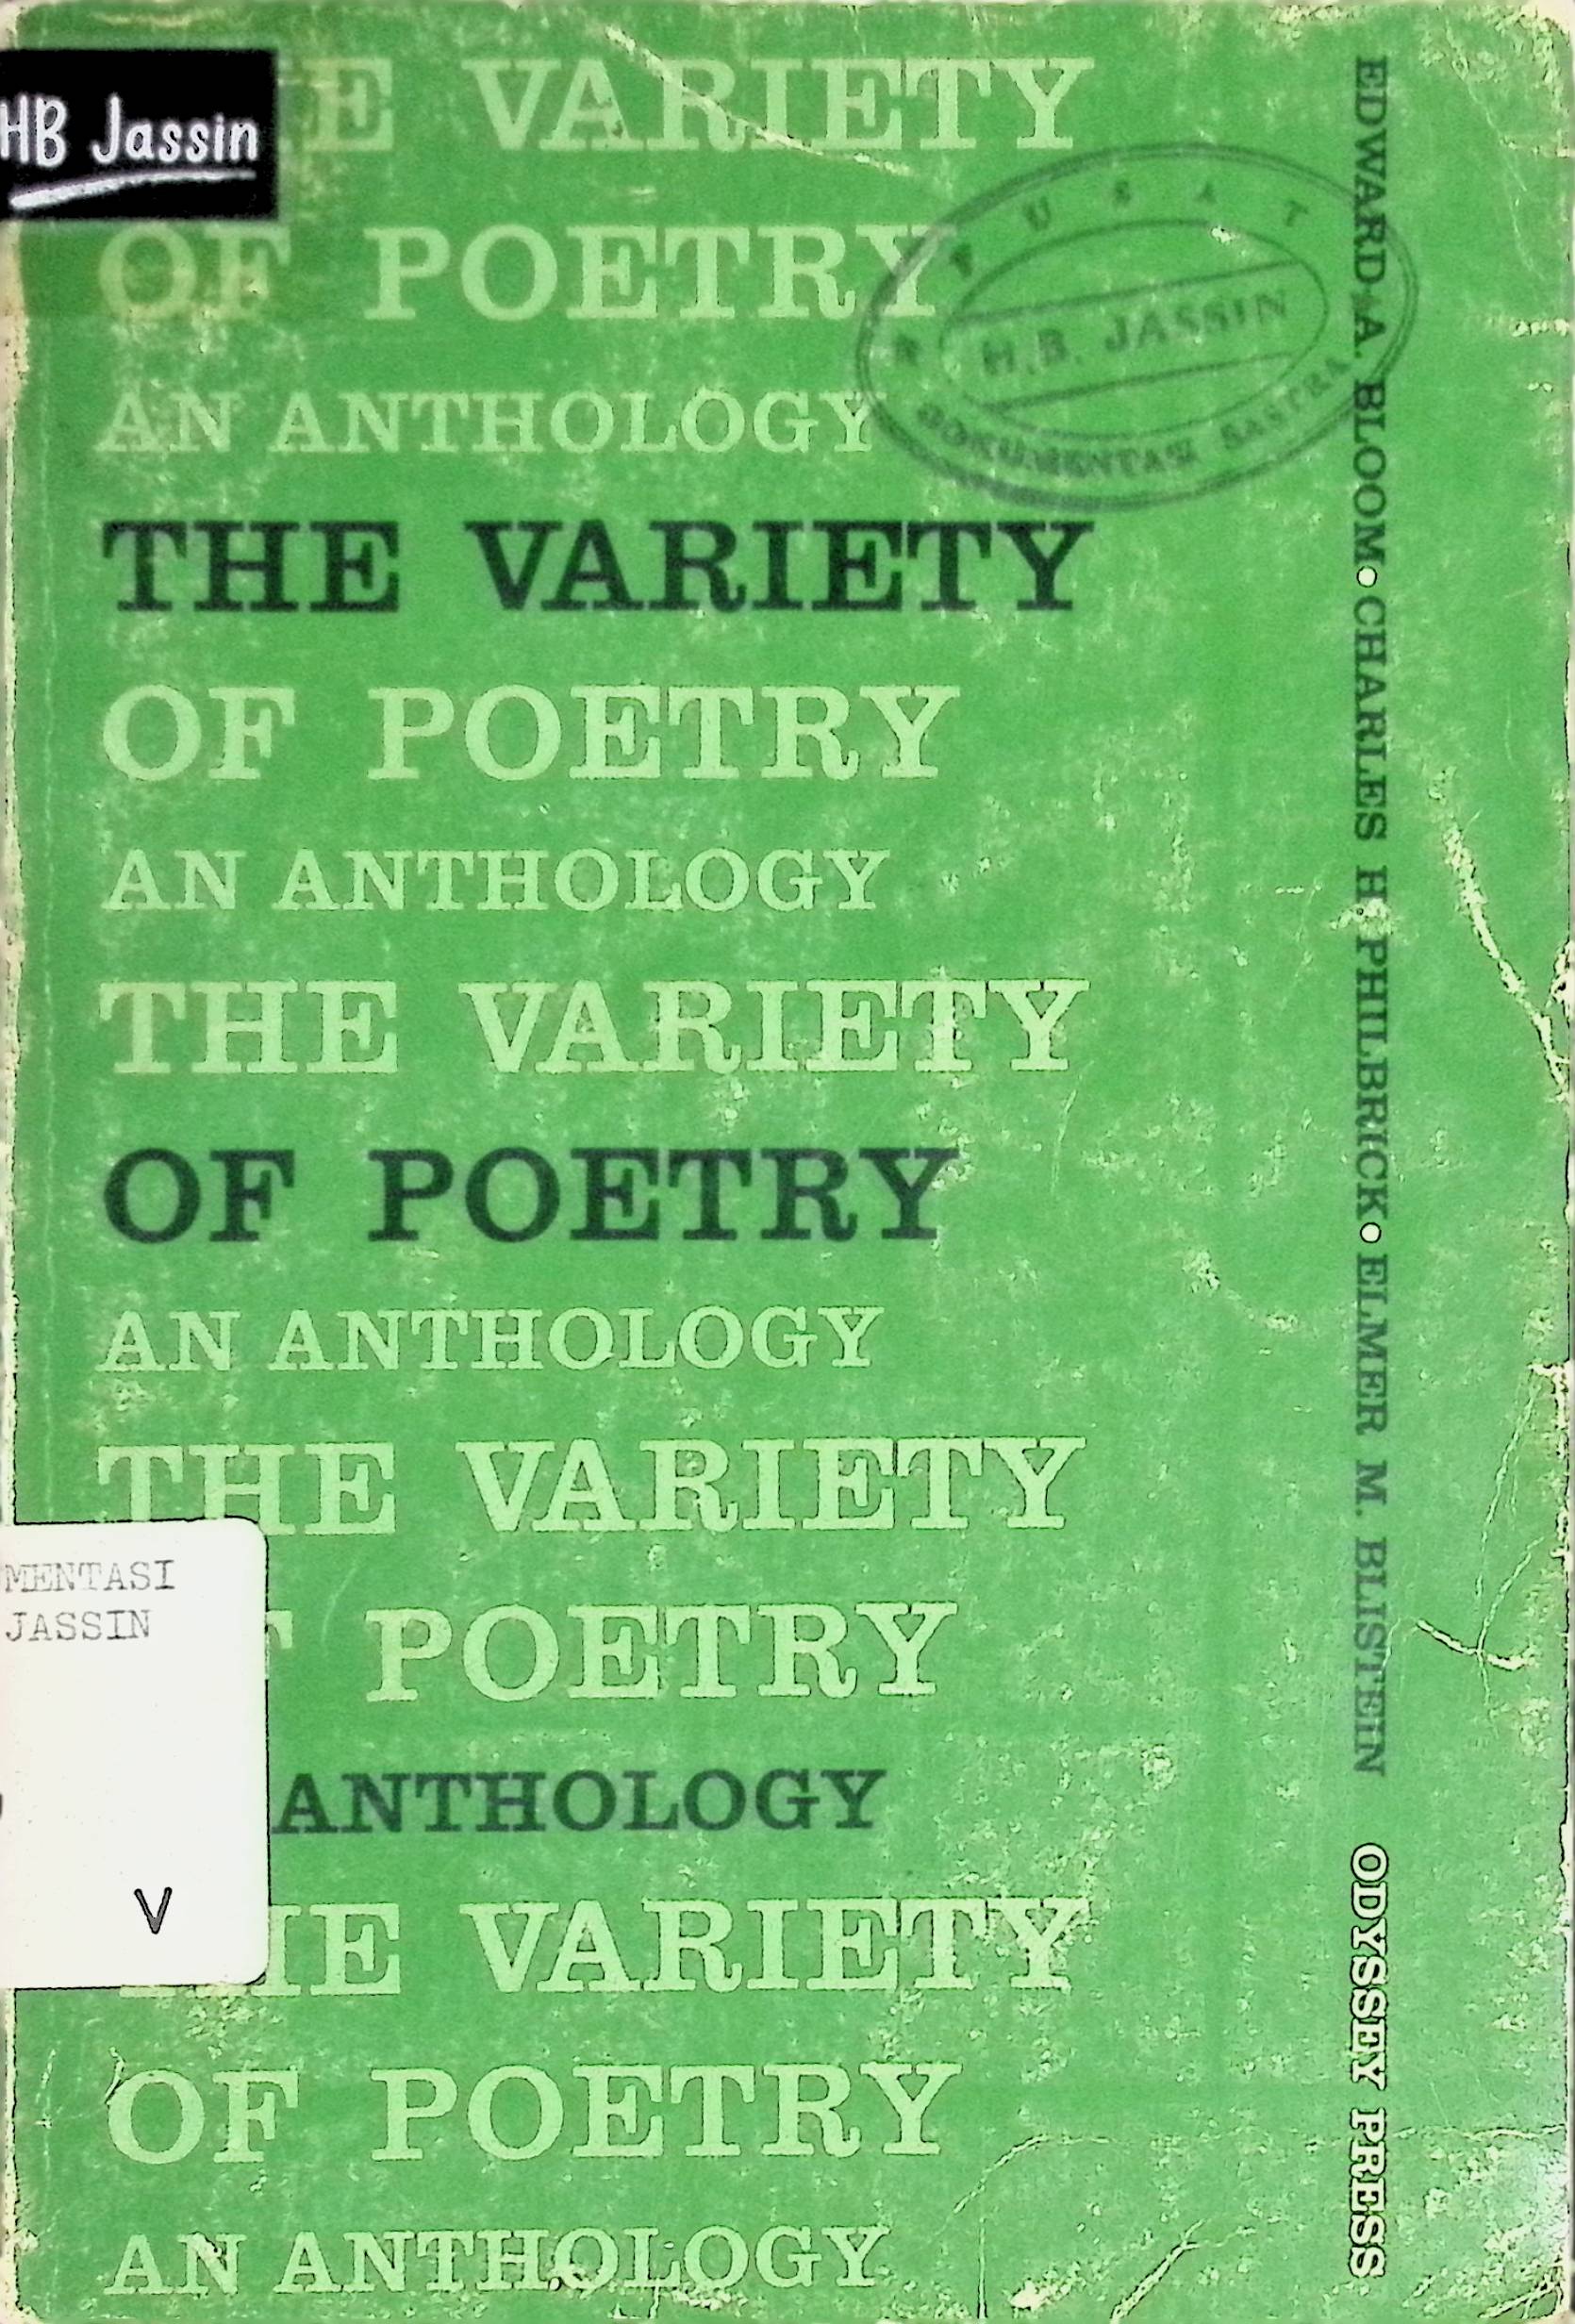 The variety of poetry: anthology